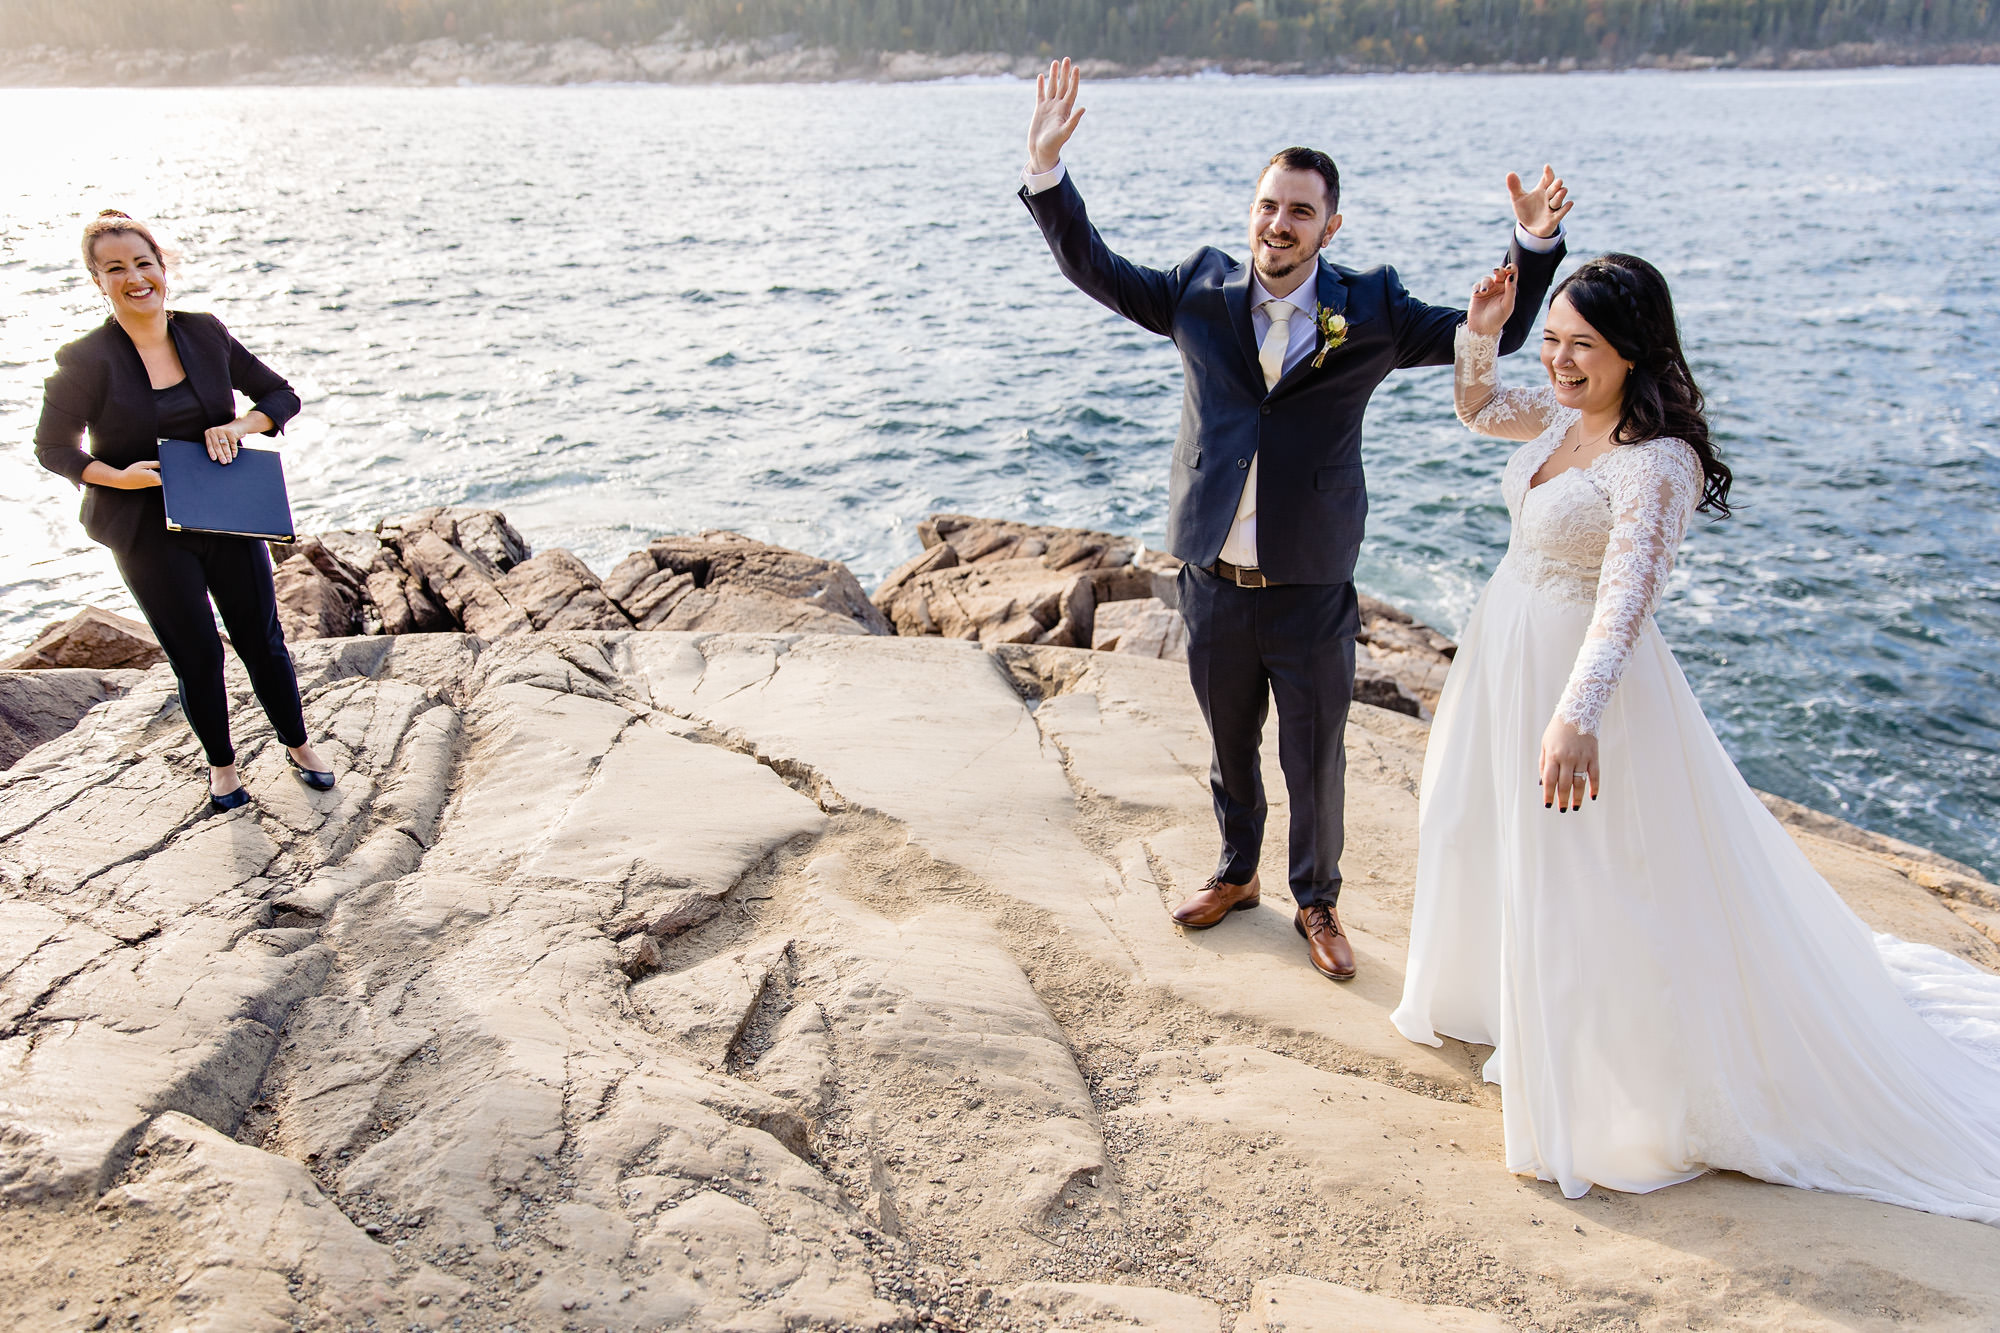 A wedding ceremony on the cliffs in Acadia National Park